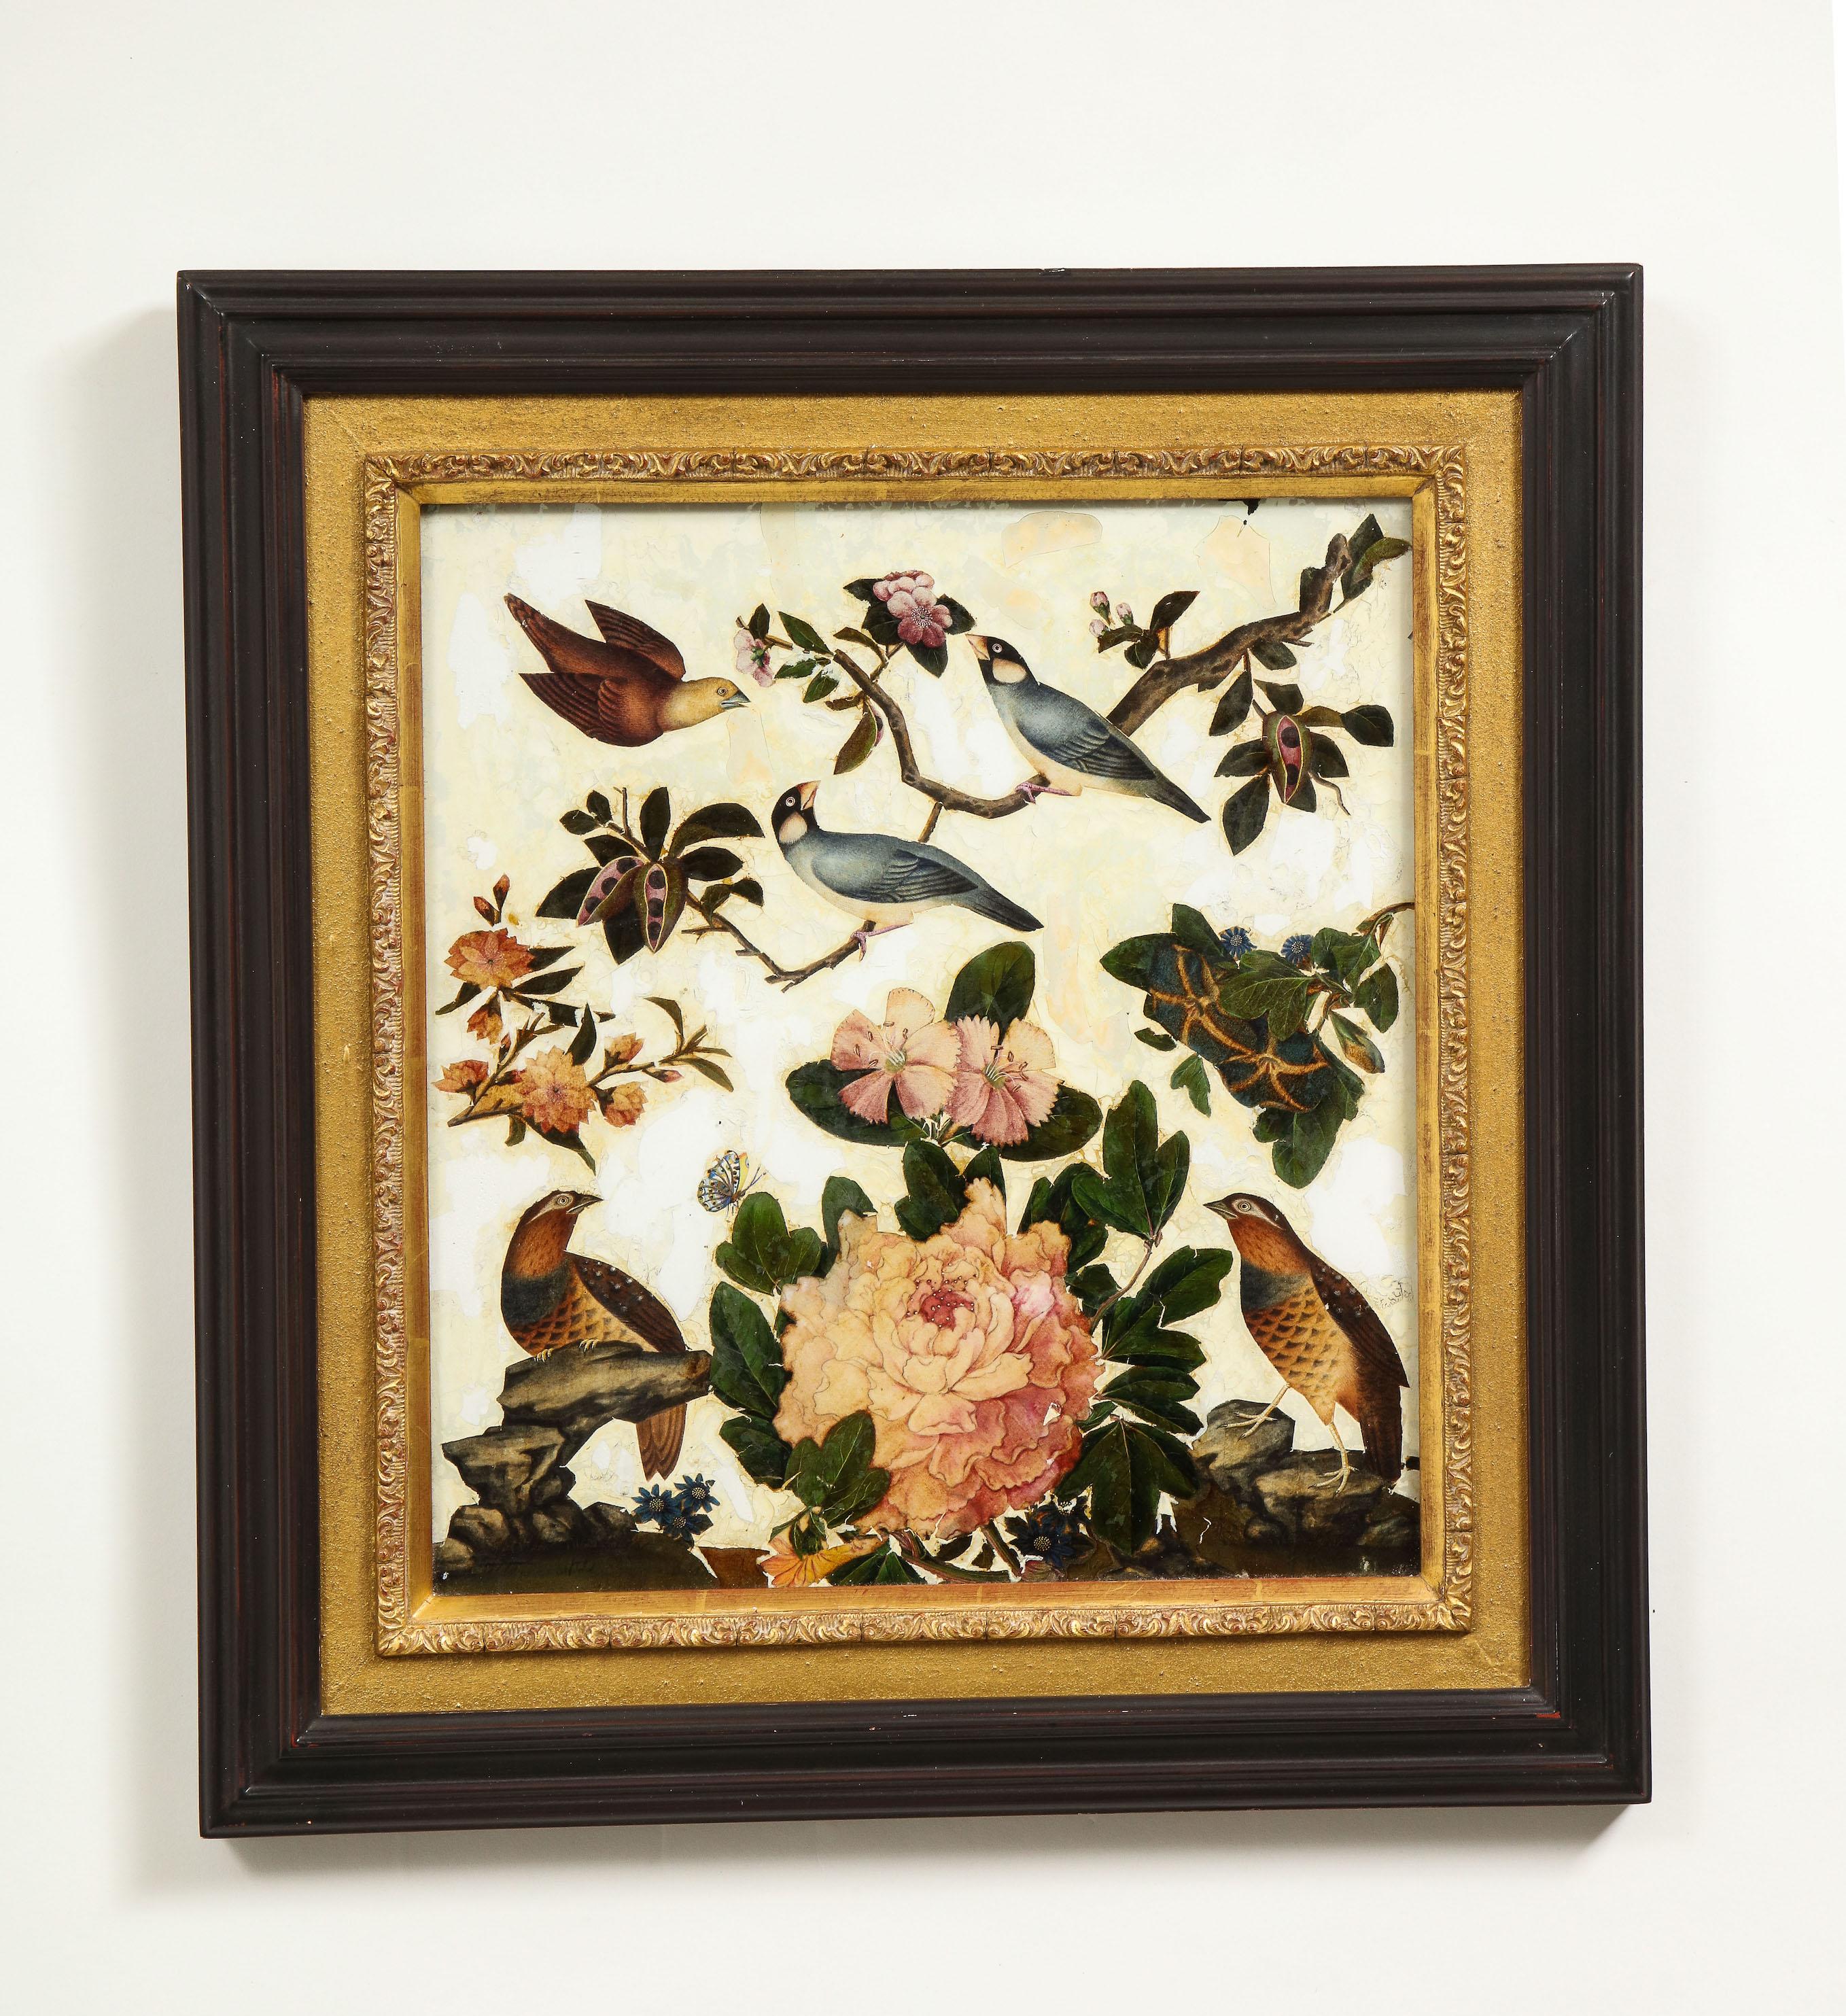 Each depicting various birds and butterflies set amongst peonies, dahlias, phlox and other country flowers on a white ground. In an ebonized wood frame with gilt gesso inner slip.